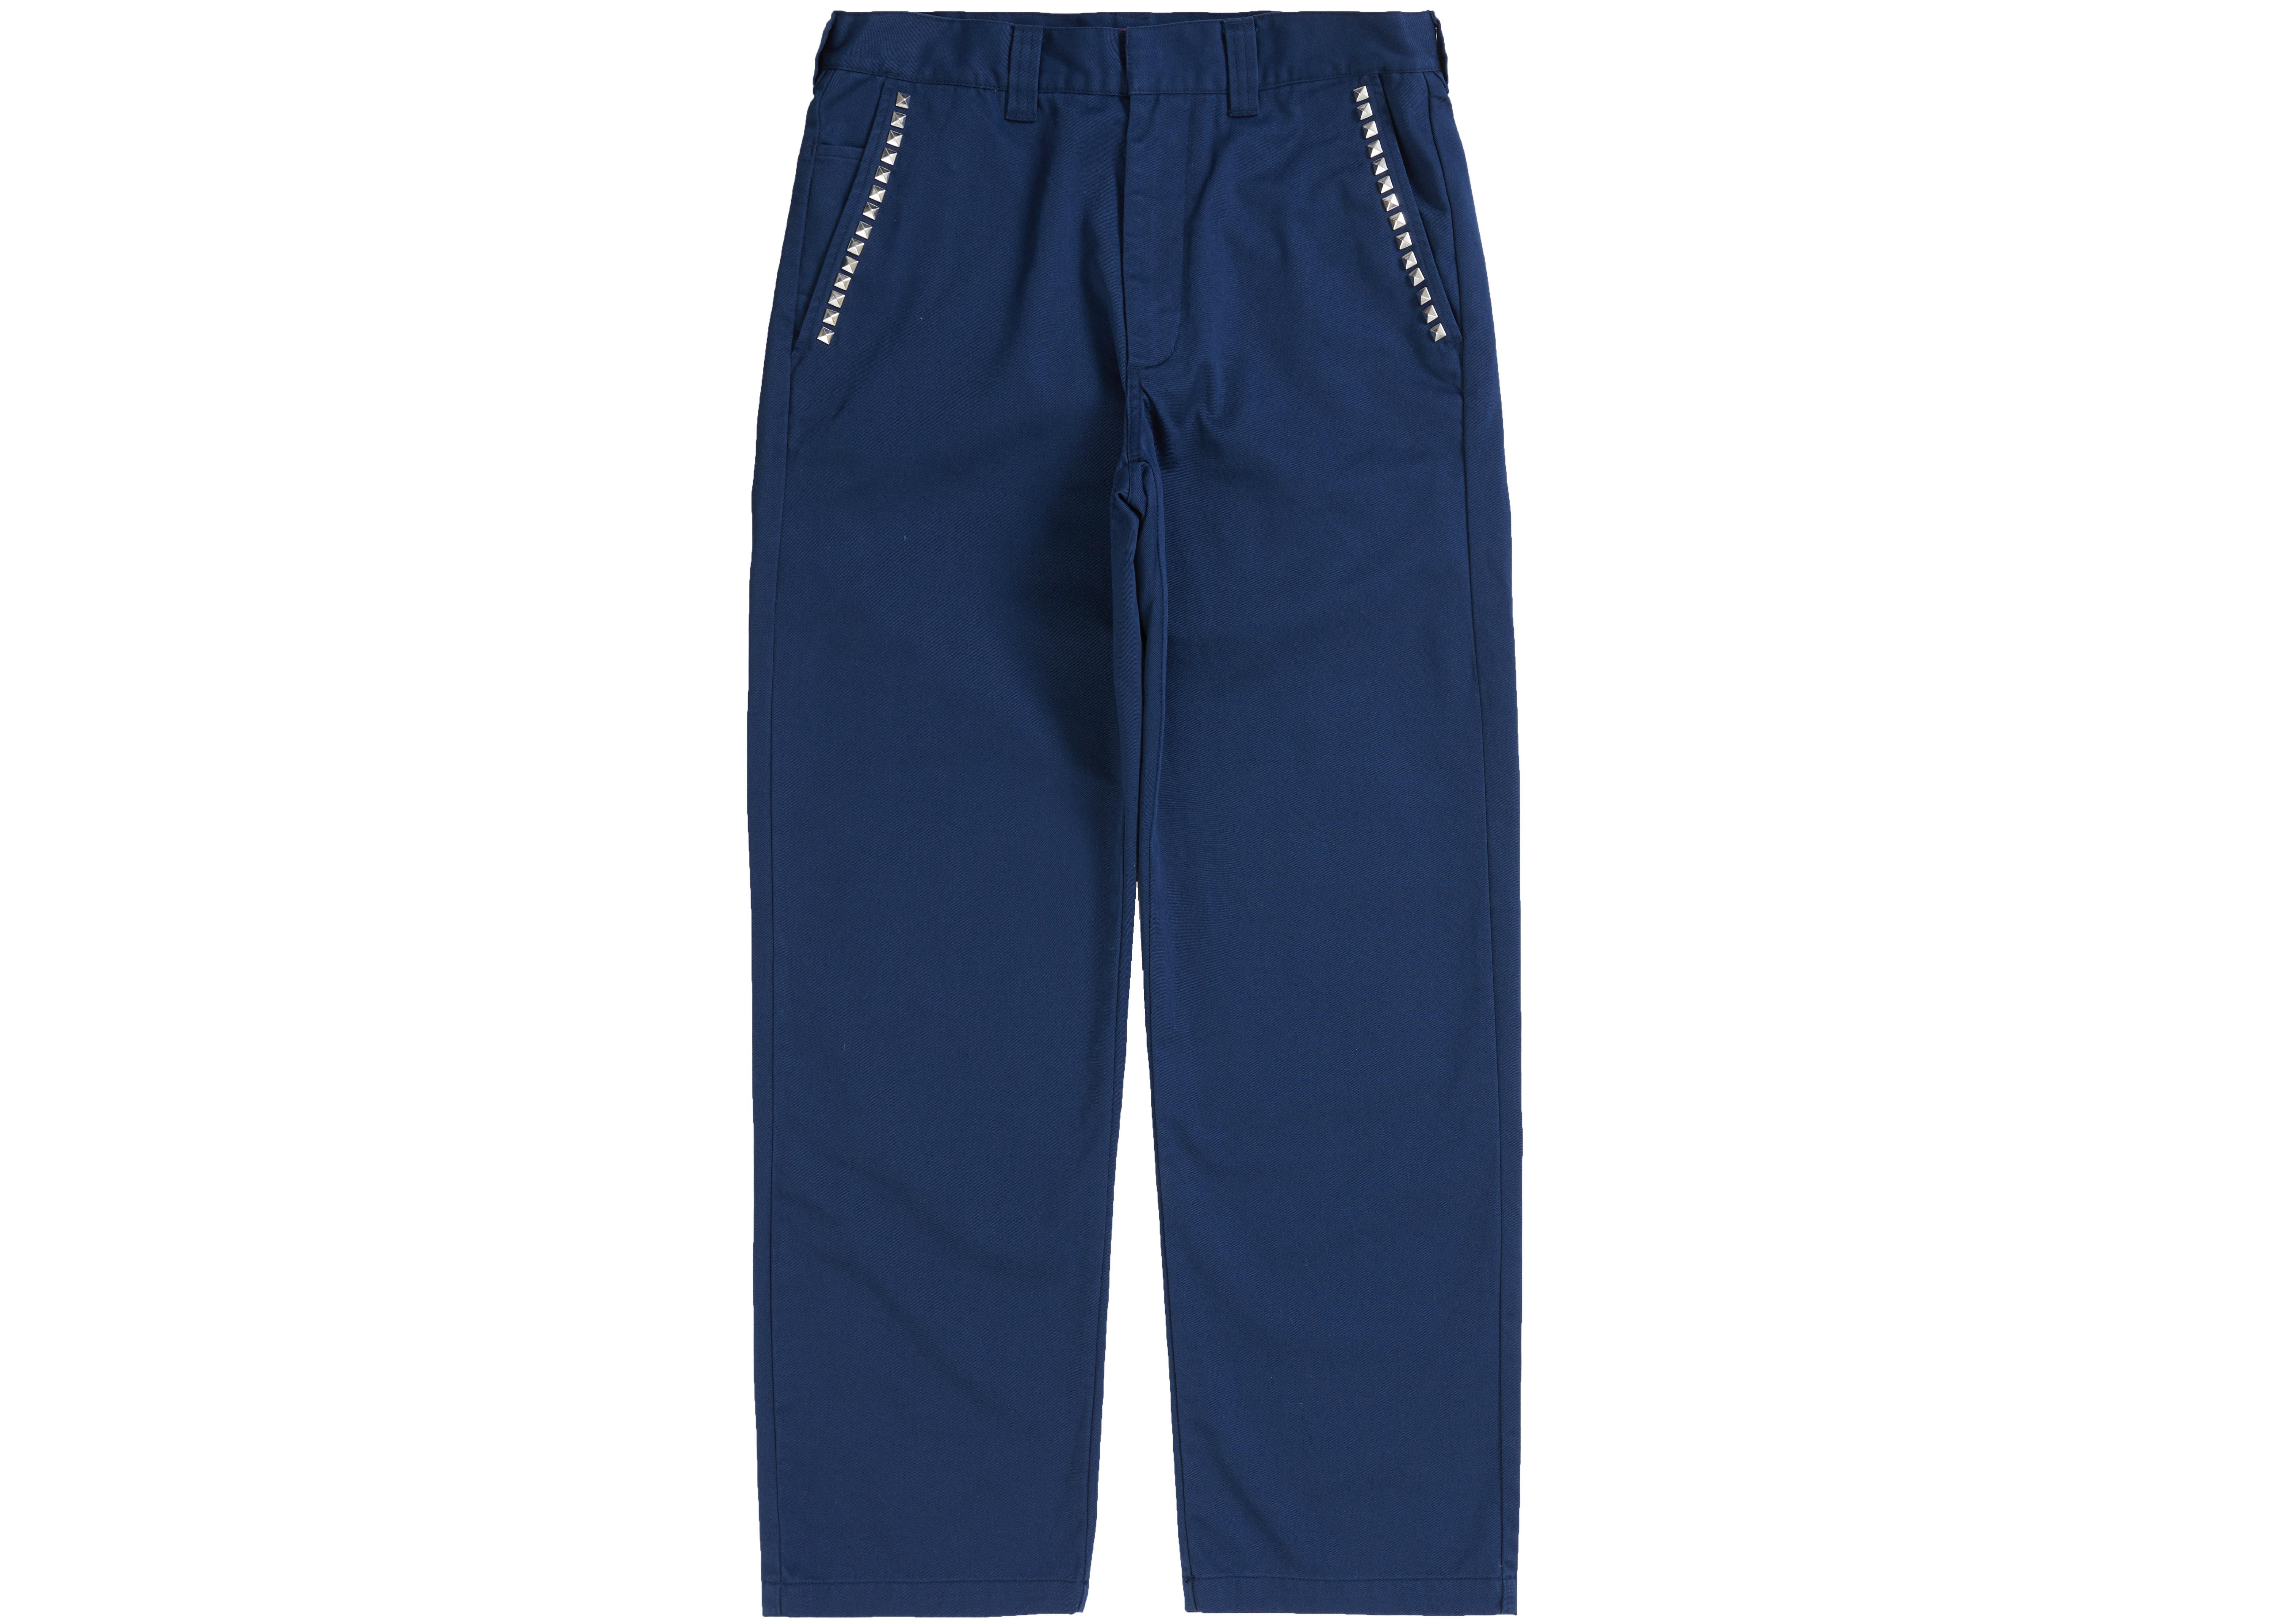 Supreme Studded Work Pant in Navy (Blue) for Men - Lyst